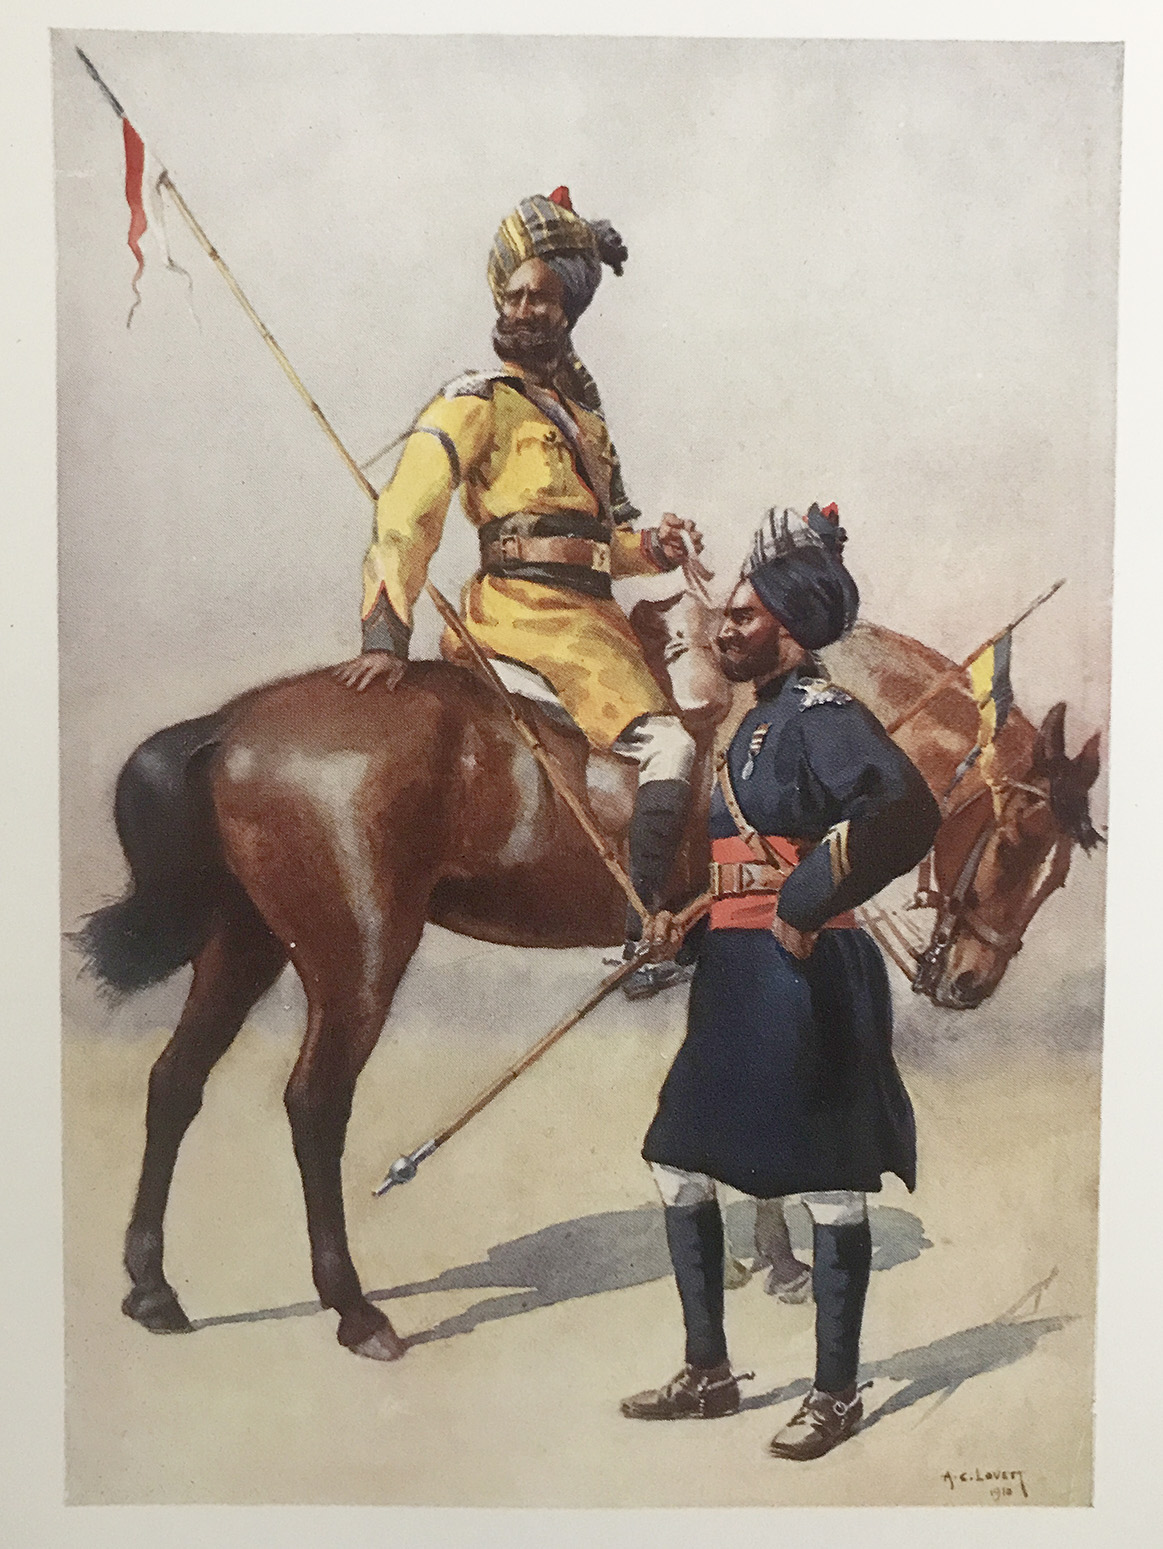 The Great Churn: Indian Military History After the Fall of Aurangzeb - anglo maratha war, Anglo Mysore War, Anglo-Sikh War, Aurangzeb, Battles & Battlefields, Bengal, Bengal Presidency, Maratha, Mughal, Mughal empire